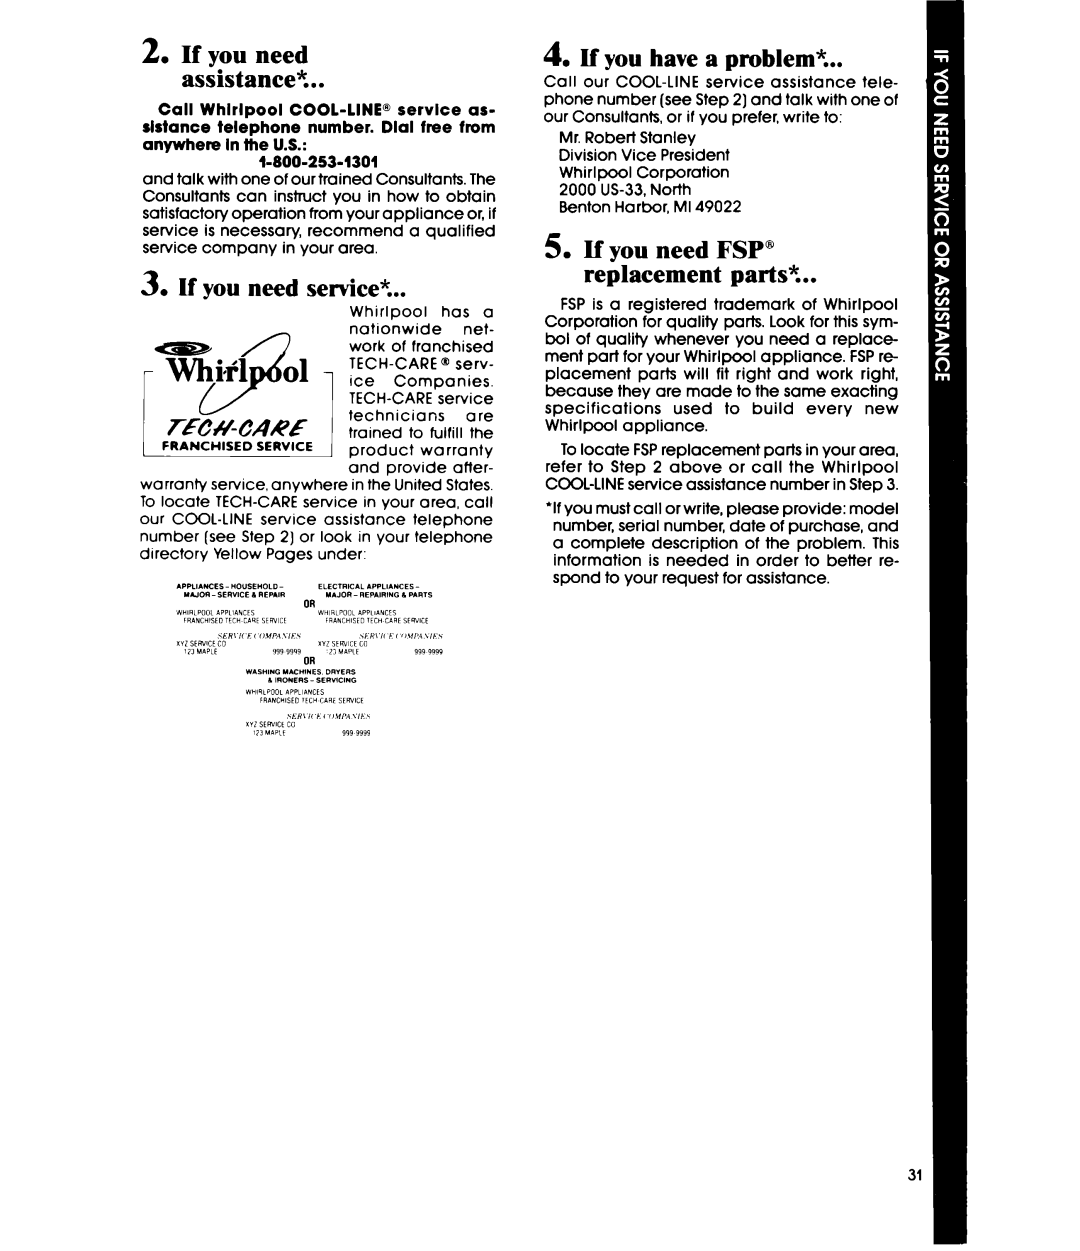 Whirlpool MW36OOXS manual If you need setice?, If you have a problem?, If you need FSP@ replacement parts? 